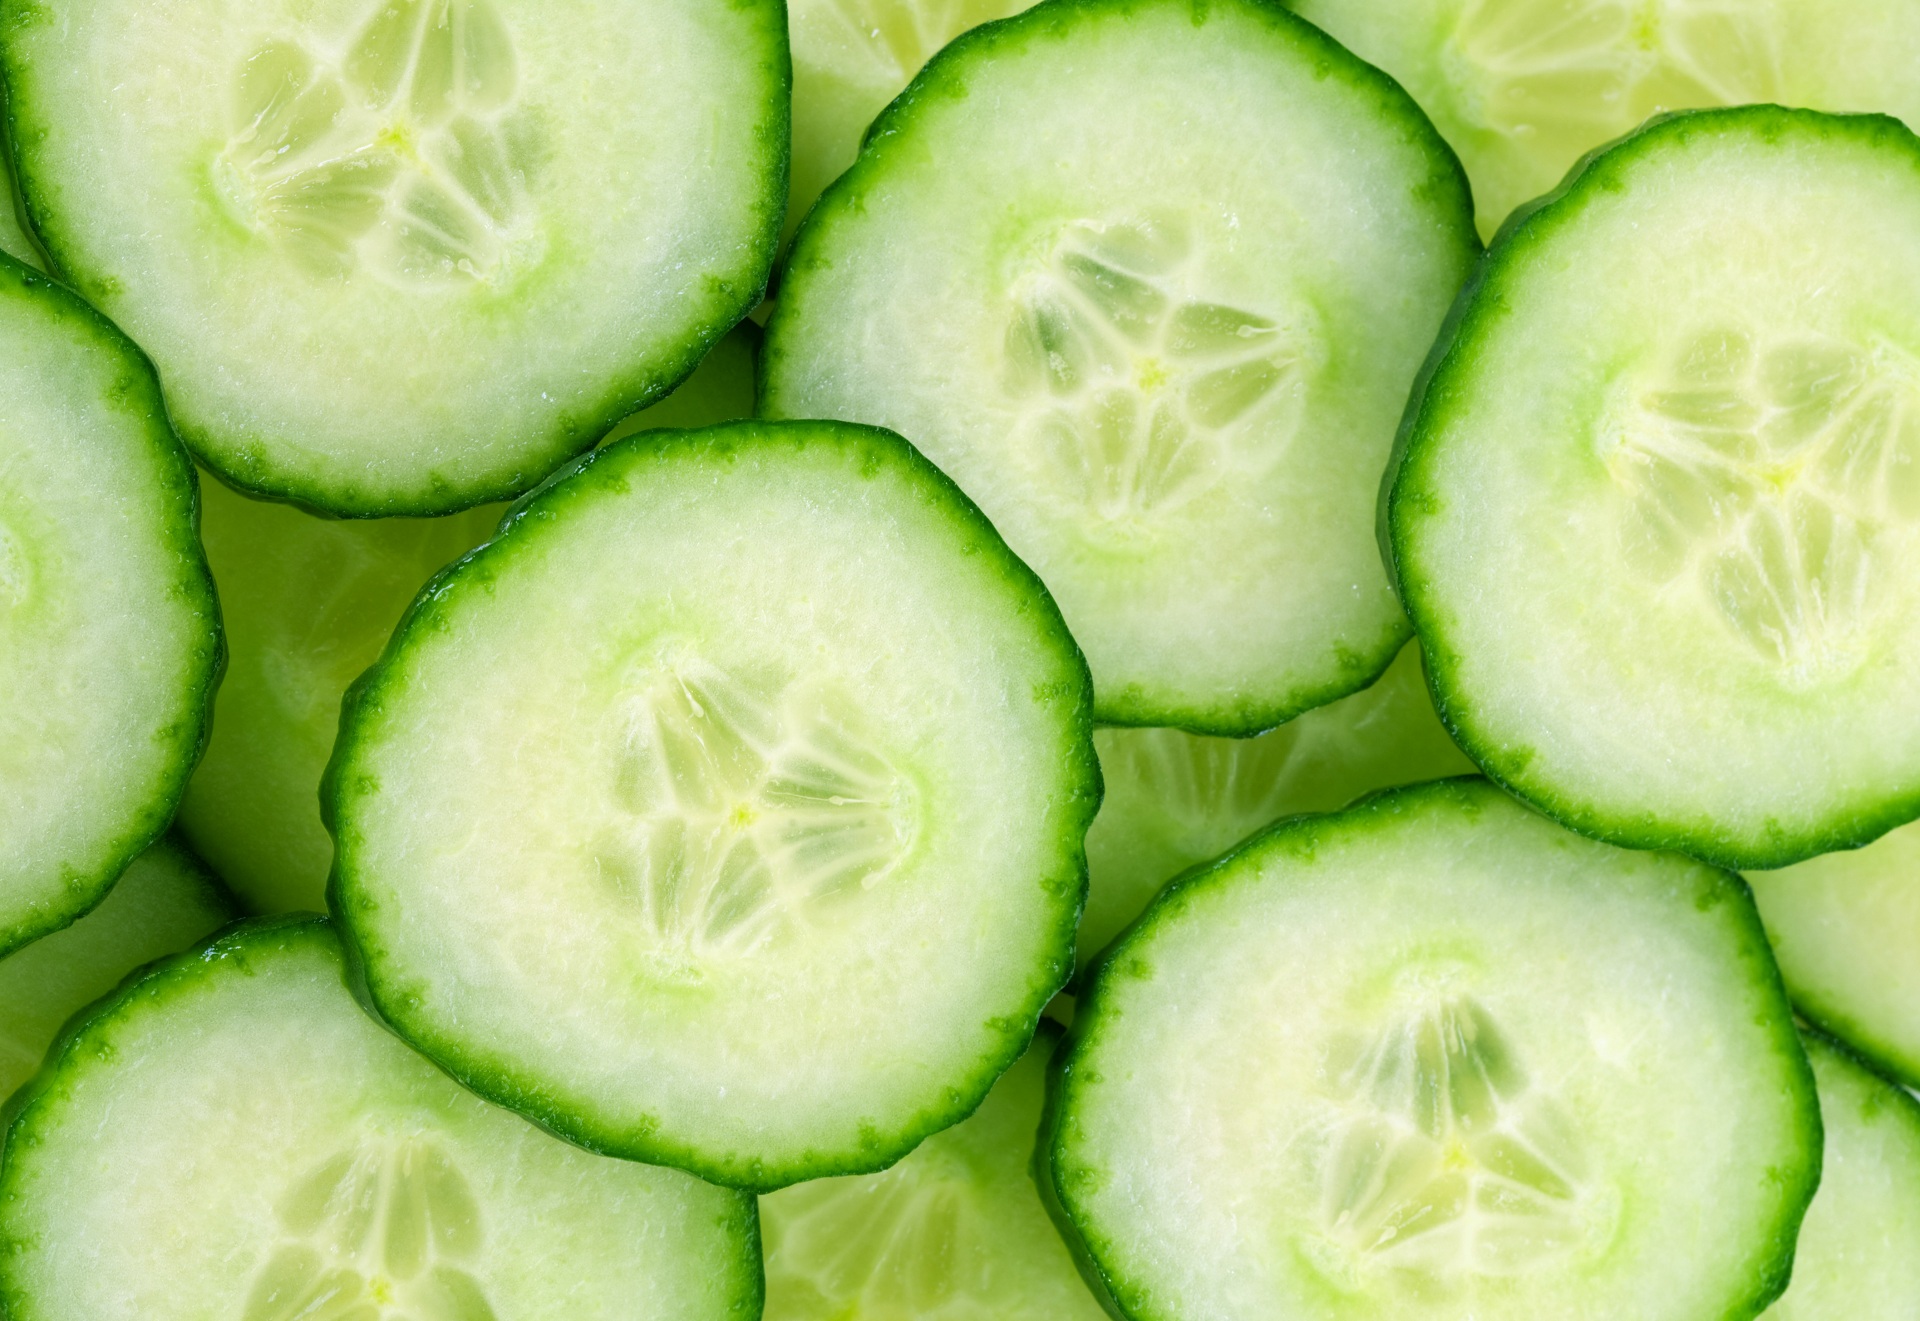 Cucumber - One of the best home remedies for pimples